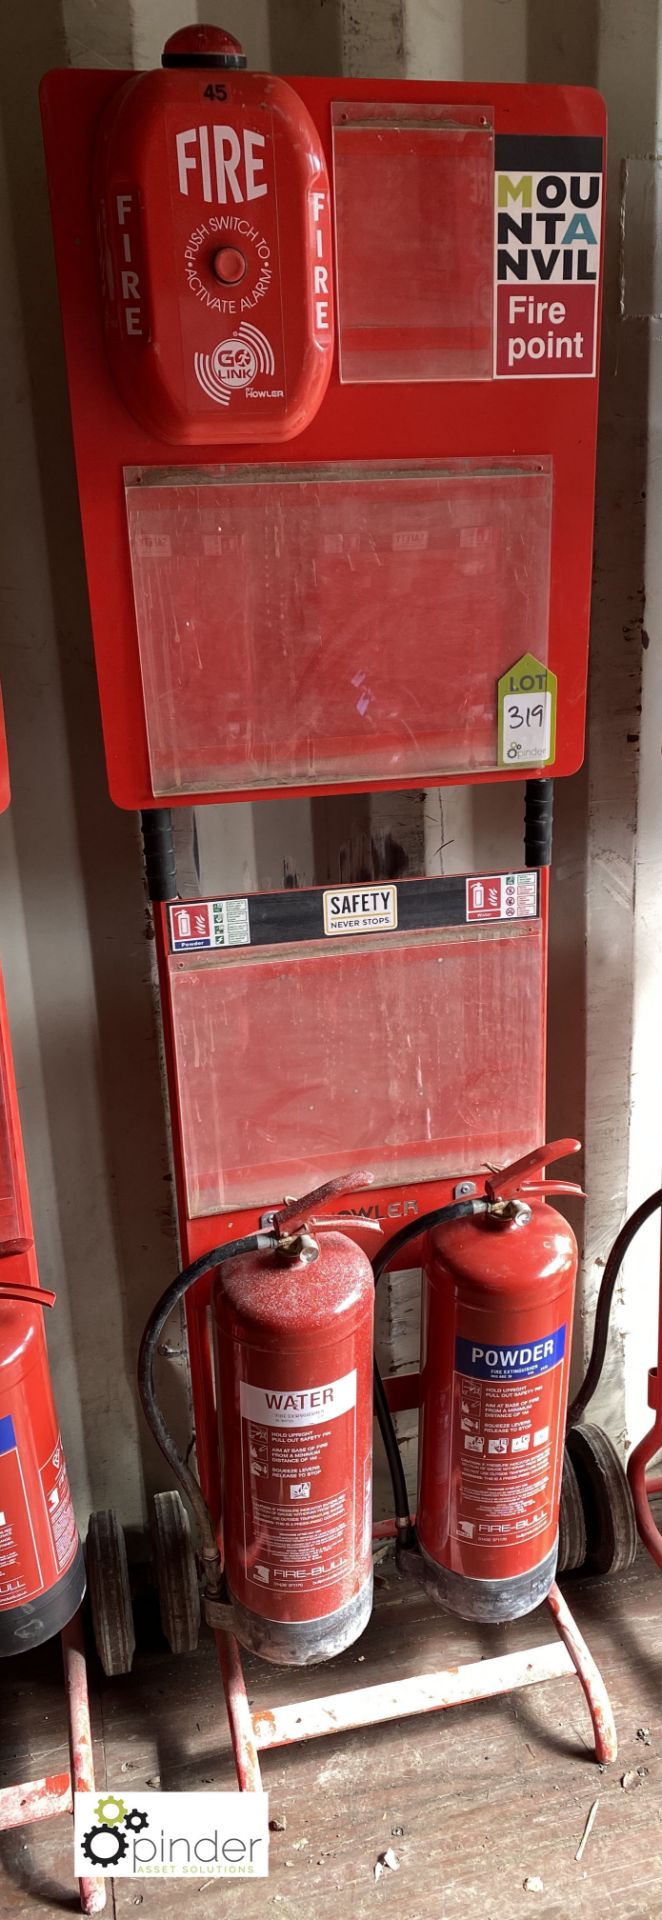 Howler mobile Fire Point, with signage, site alert alarm, water fire extinguisher and powder fire